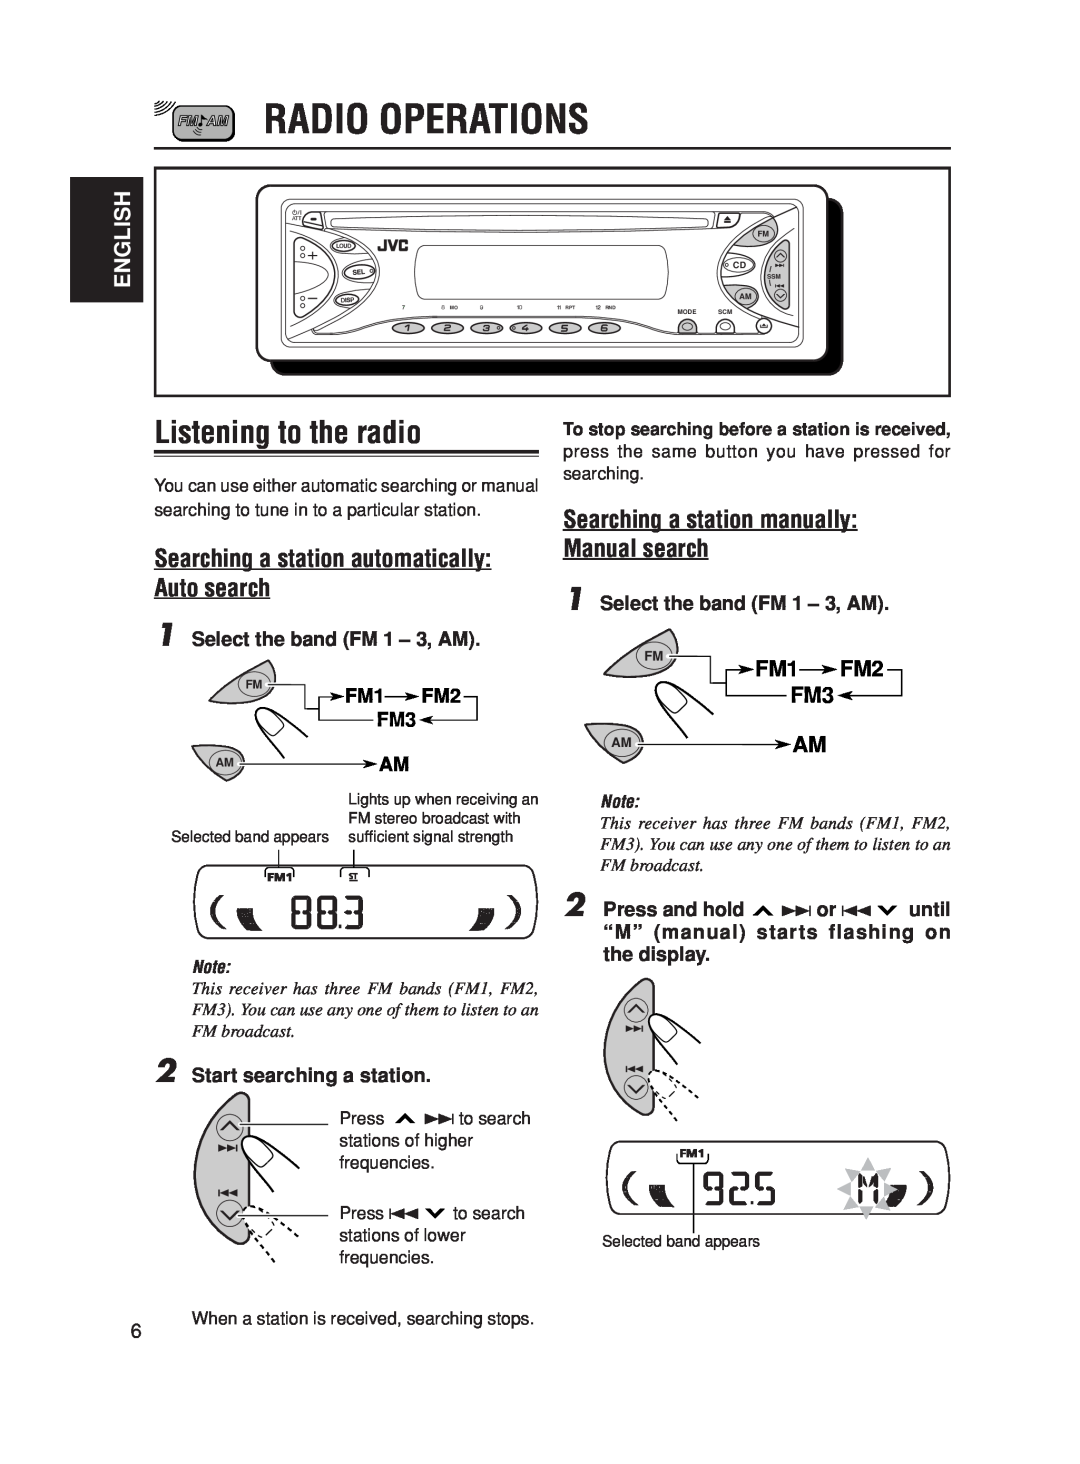 JVC KD-S10 Radio Operations, Listening to the radio, Searching a station automatically Auto search, FM1FM2 FM3, English 